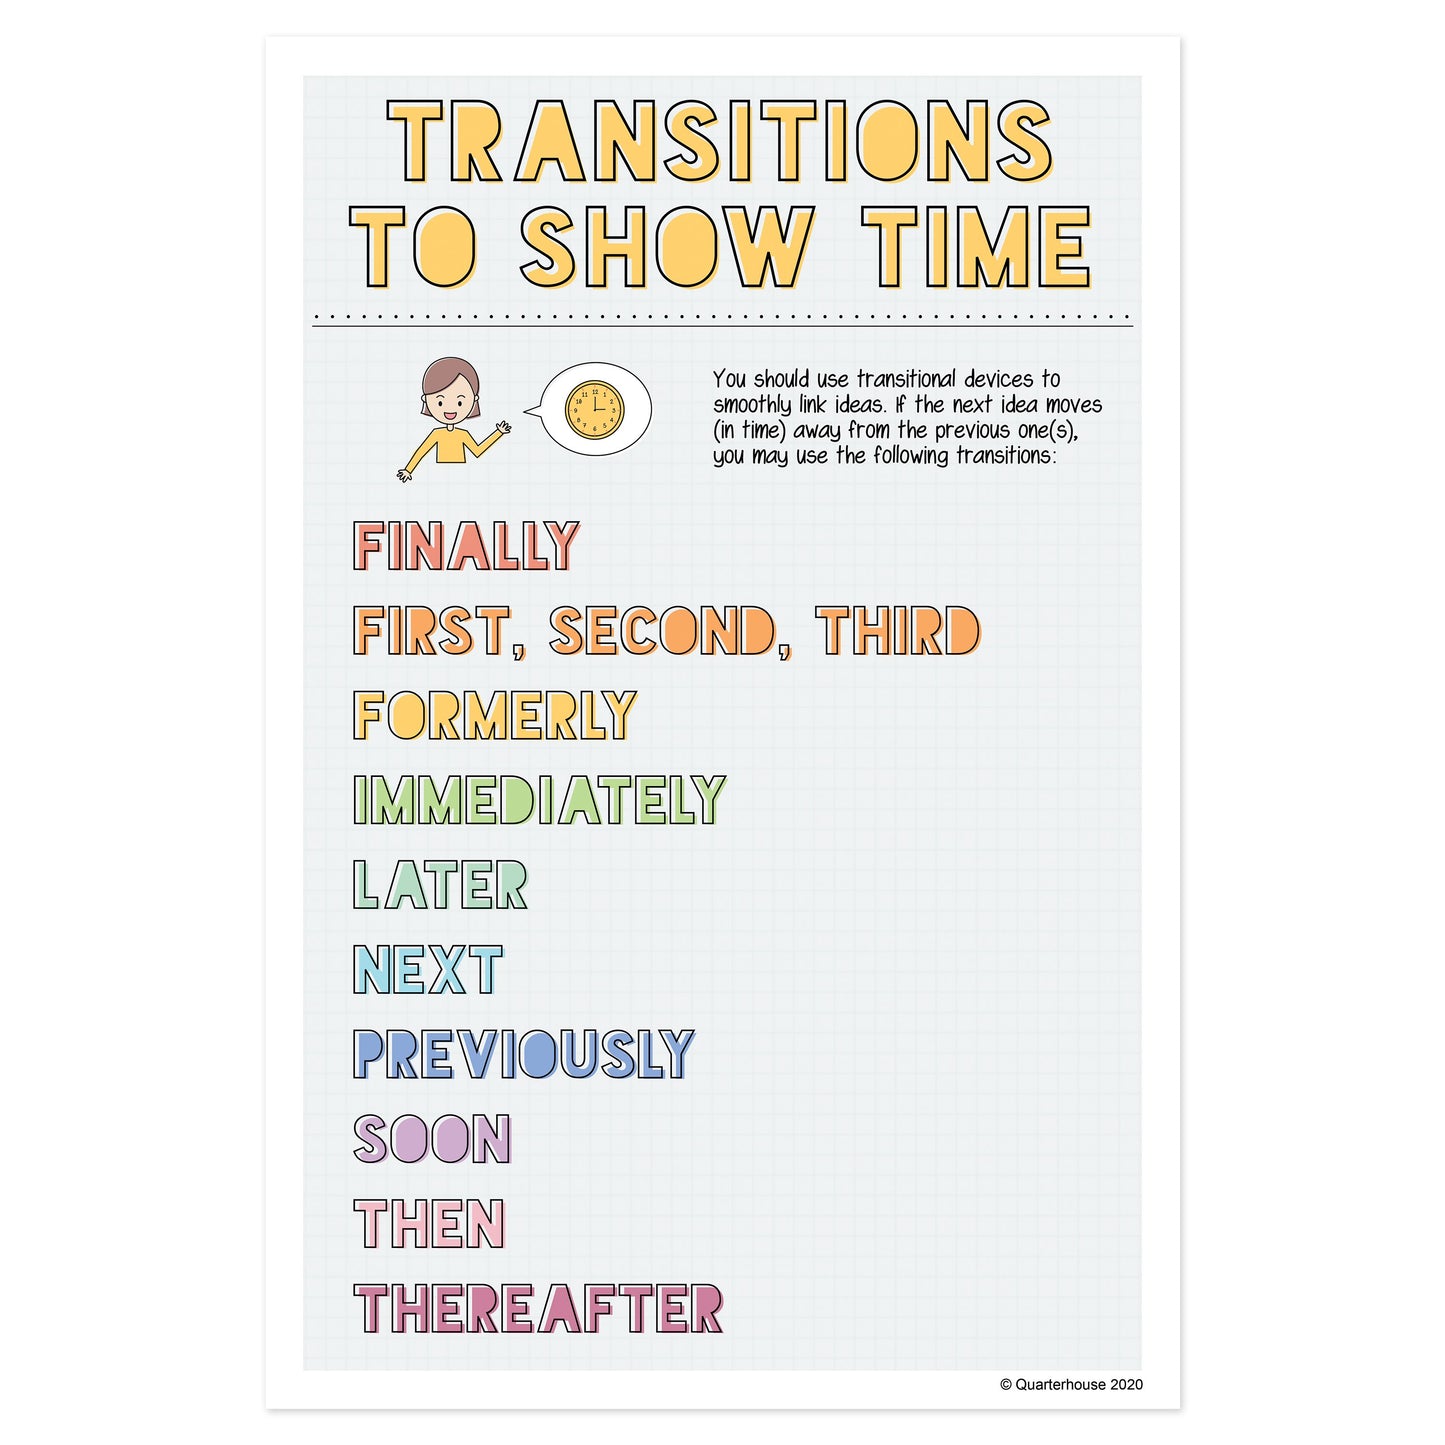 Quarterhouse Transitions to Show Time Poster, English-Language Arts Classroom Materials for Teachers